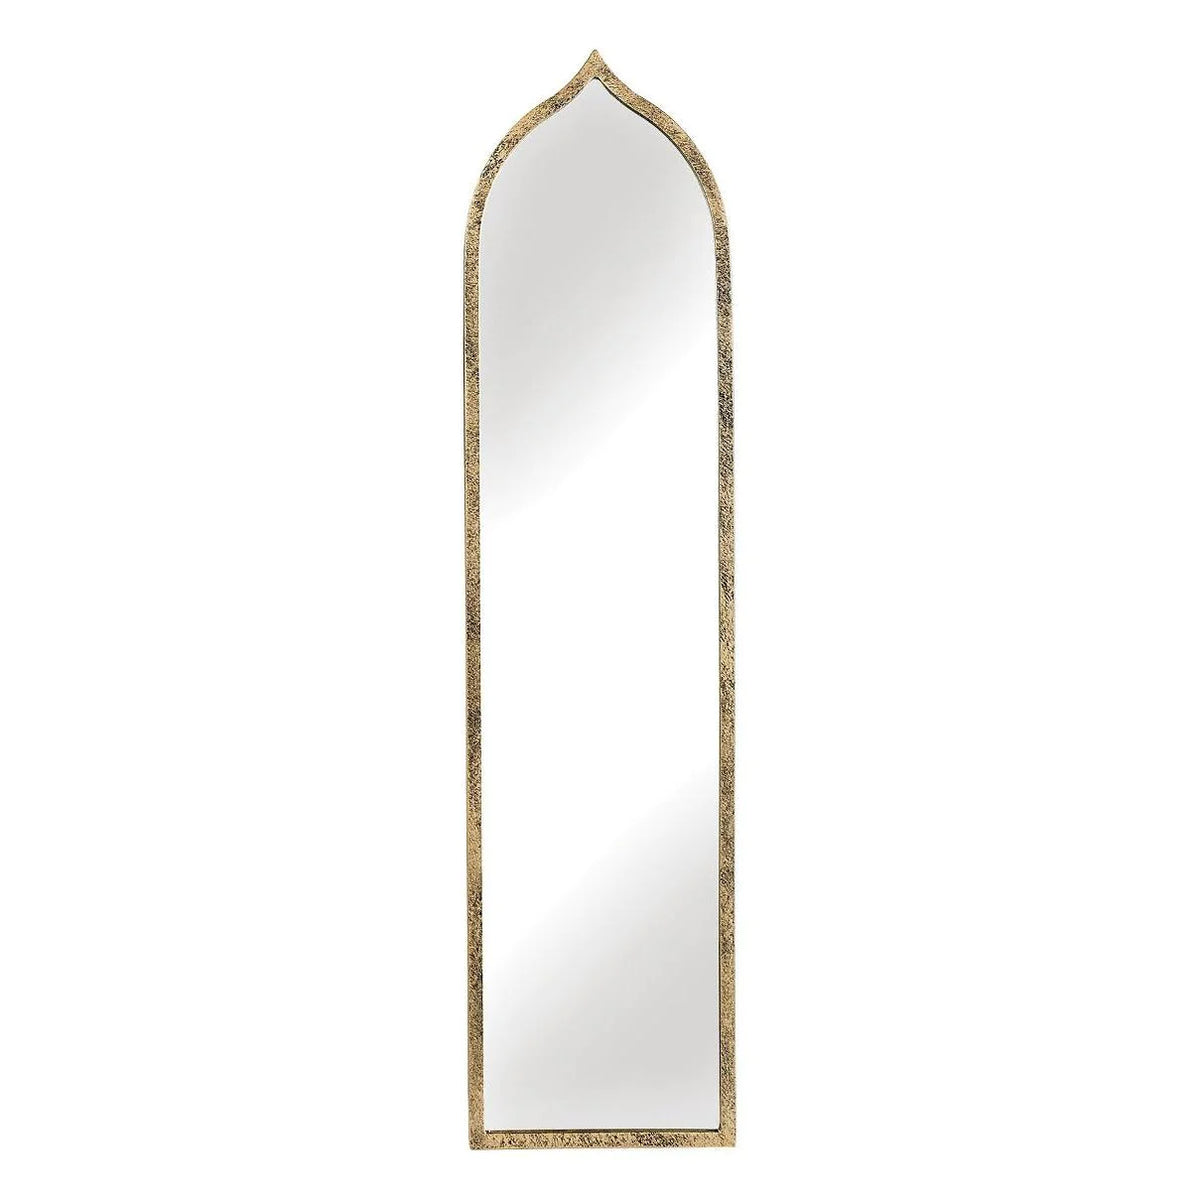 Kaitlyn Ogee Shaped Mirror - Antique Gold Finish